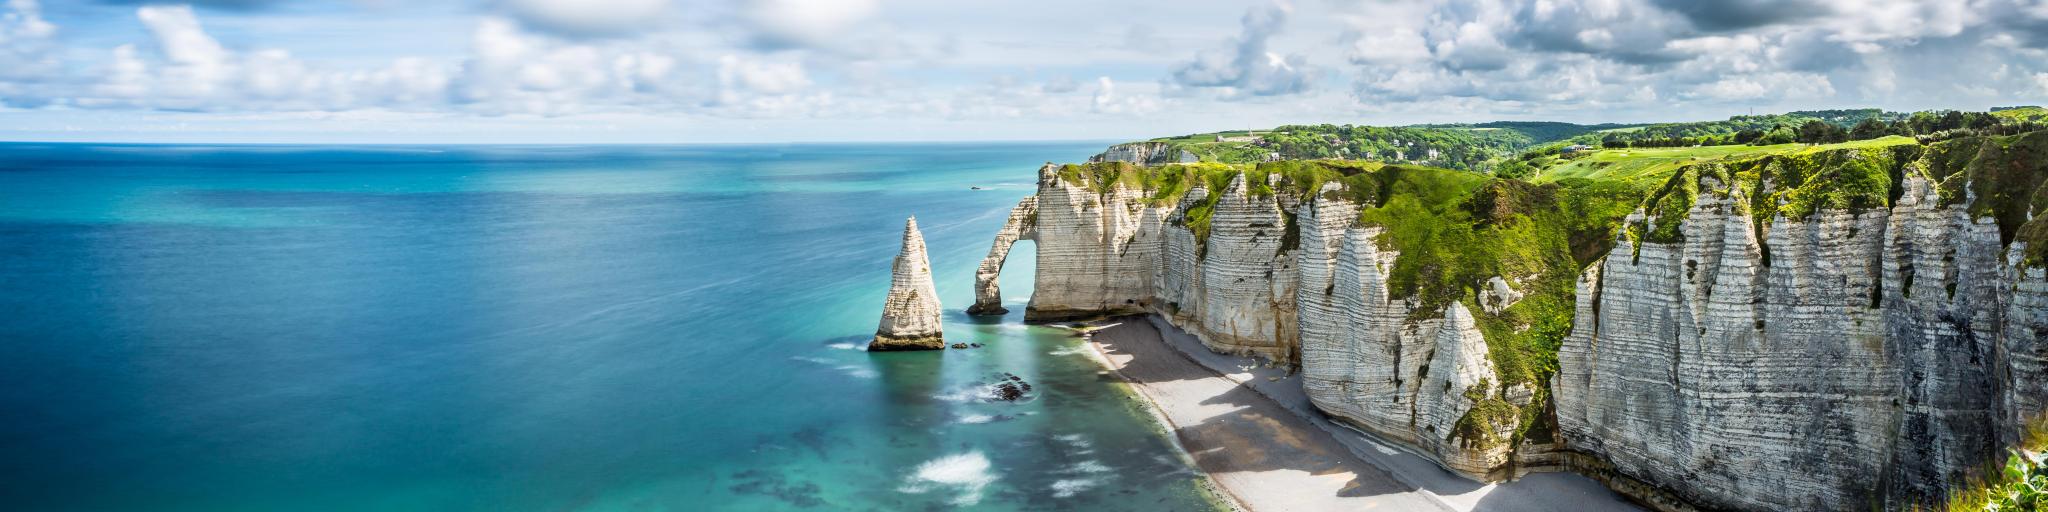 Beautiful Panorama in Etretat France. You can see the sea, beach, coast, Normandy, Atlantic Ocean, cliffs and rock in the photo.